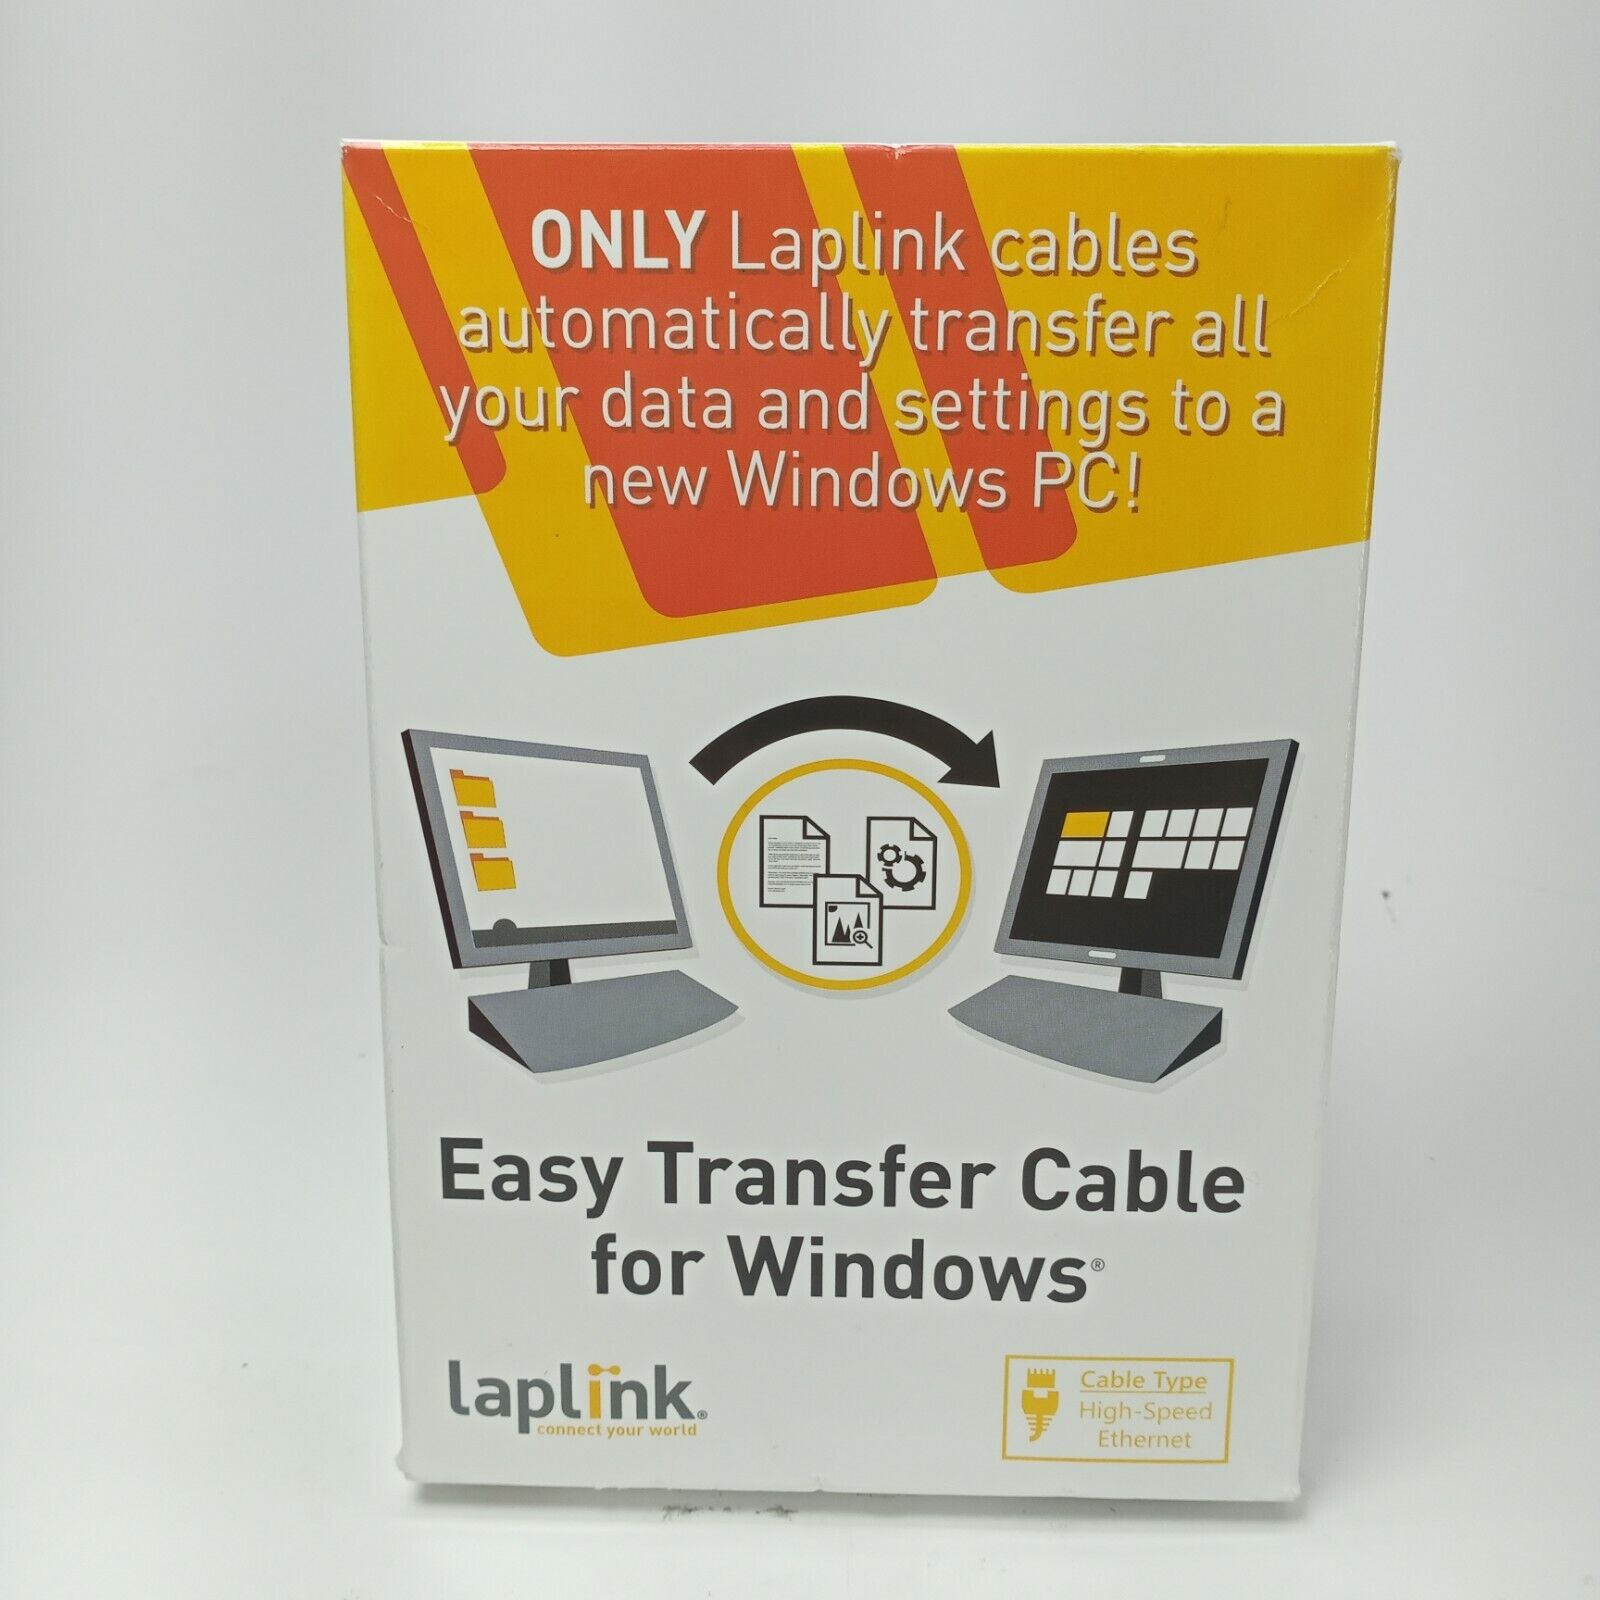 LAPLINK EASY TRANSFER CABLE - FOR WINDOWS PC/COMPUTER